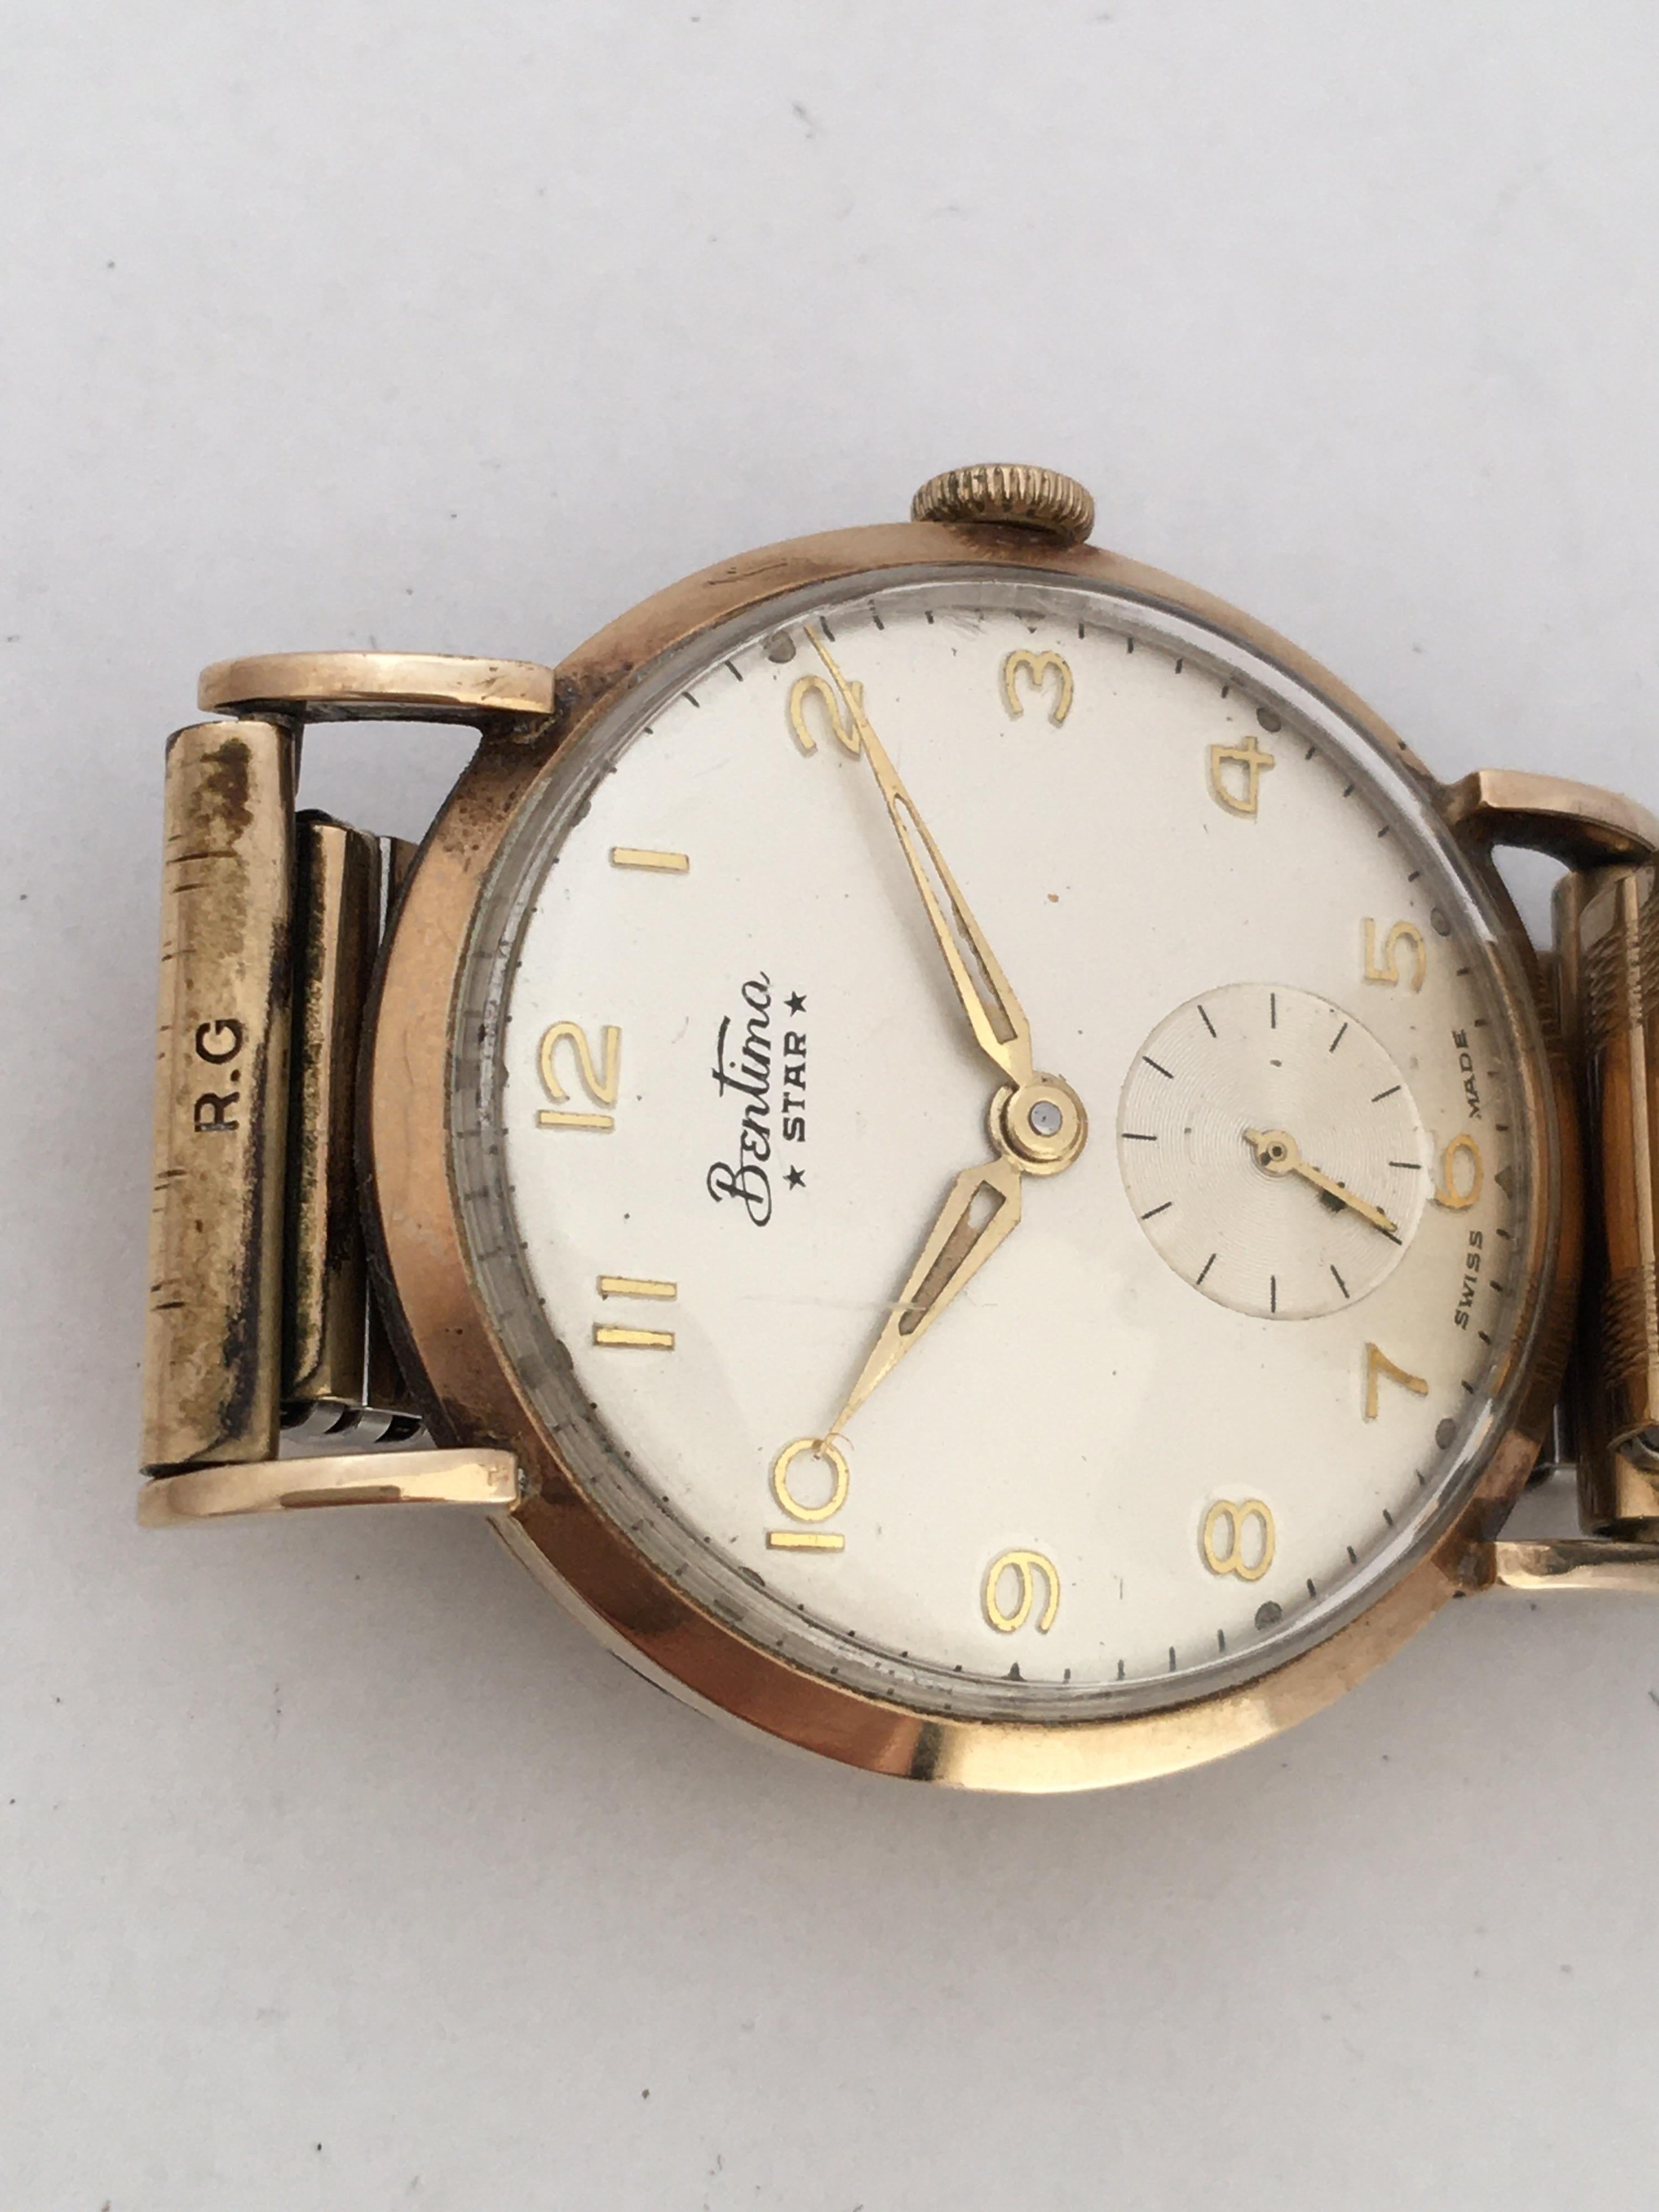 9 Karat Gold Vintage 1960s Bentima Star Mechanical Watch In Good Condition For Sale In Carlisle, GB